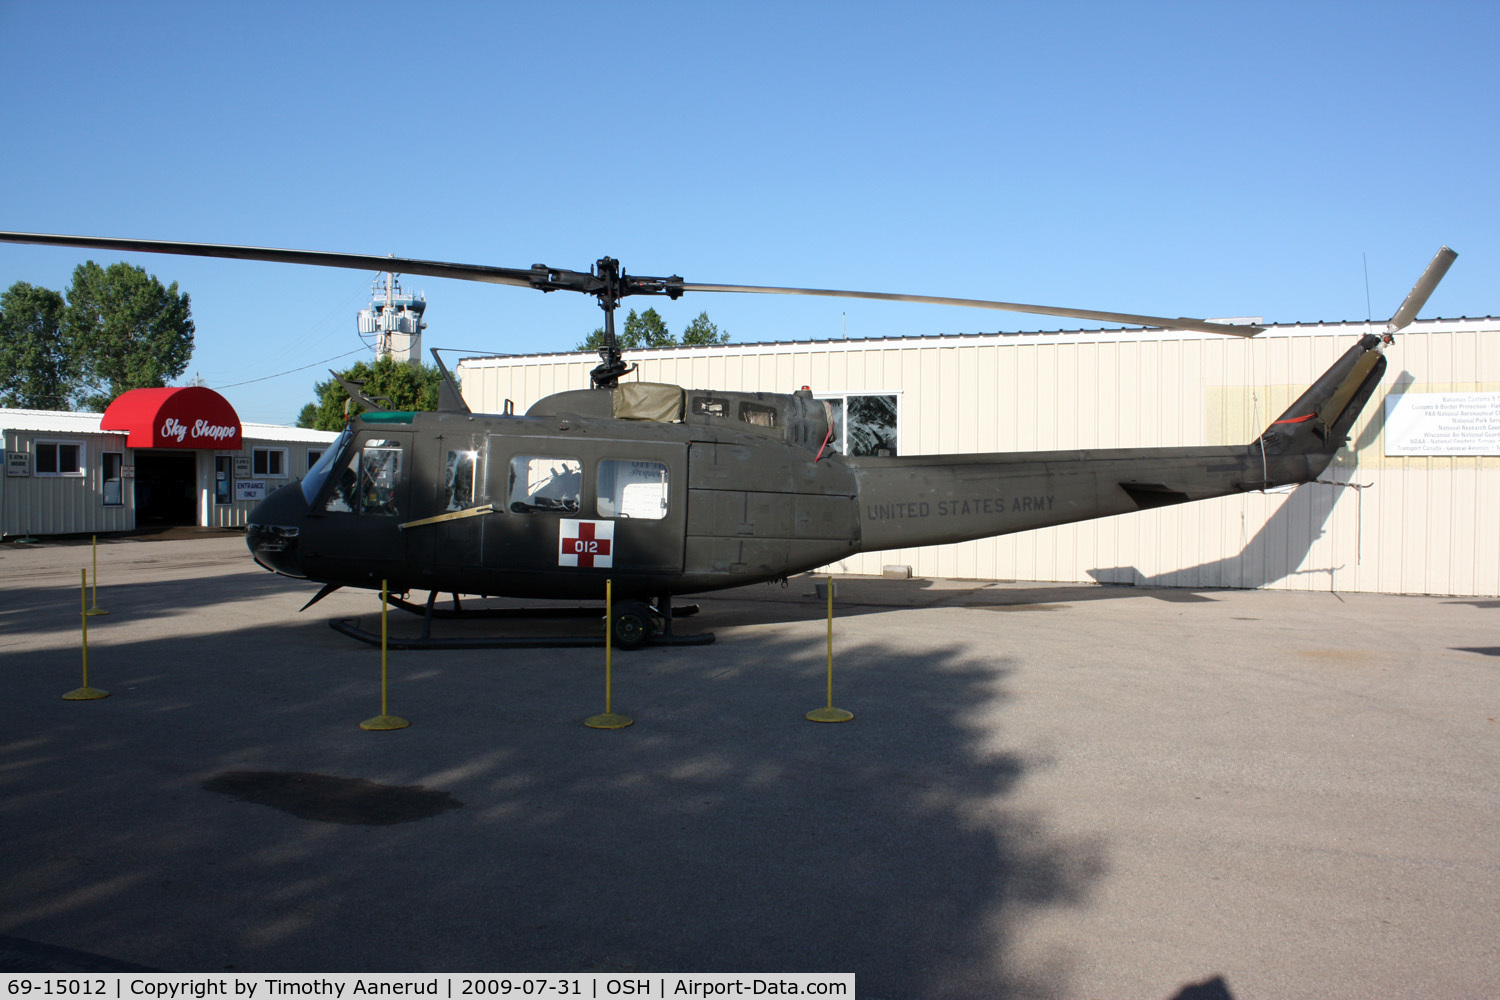 69-15012, 1969 Bell UH-1V Iroquois C/N 11300, uh-1